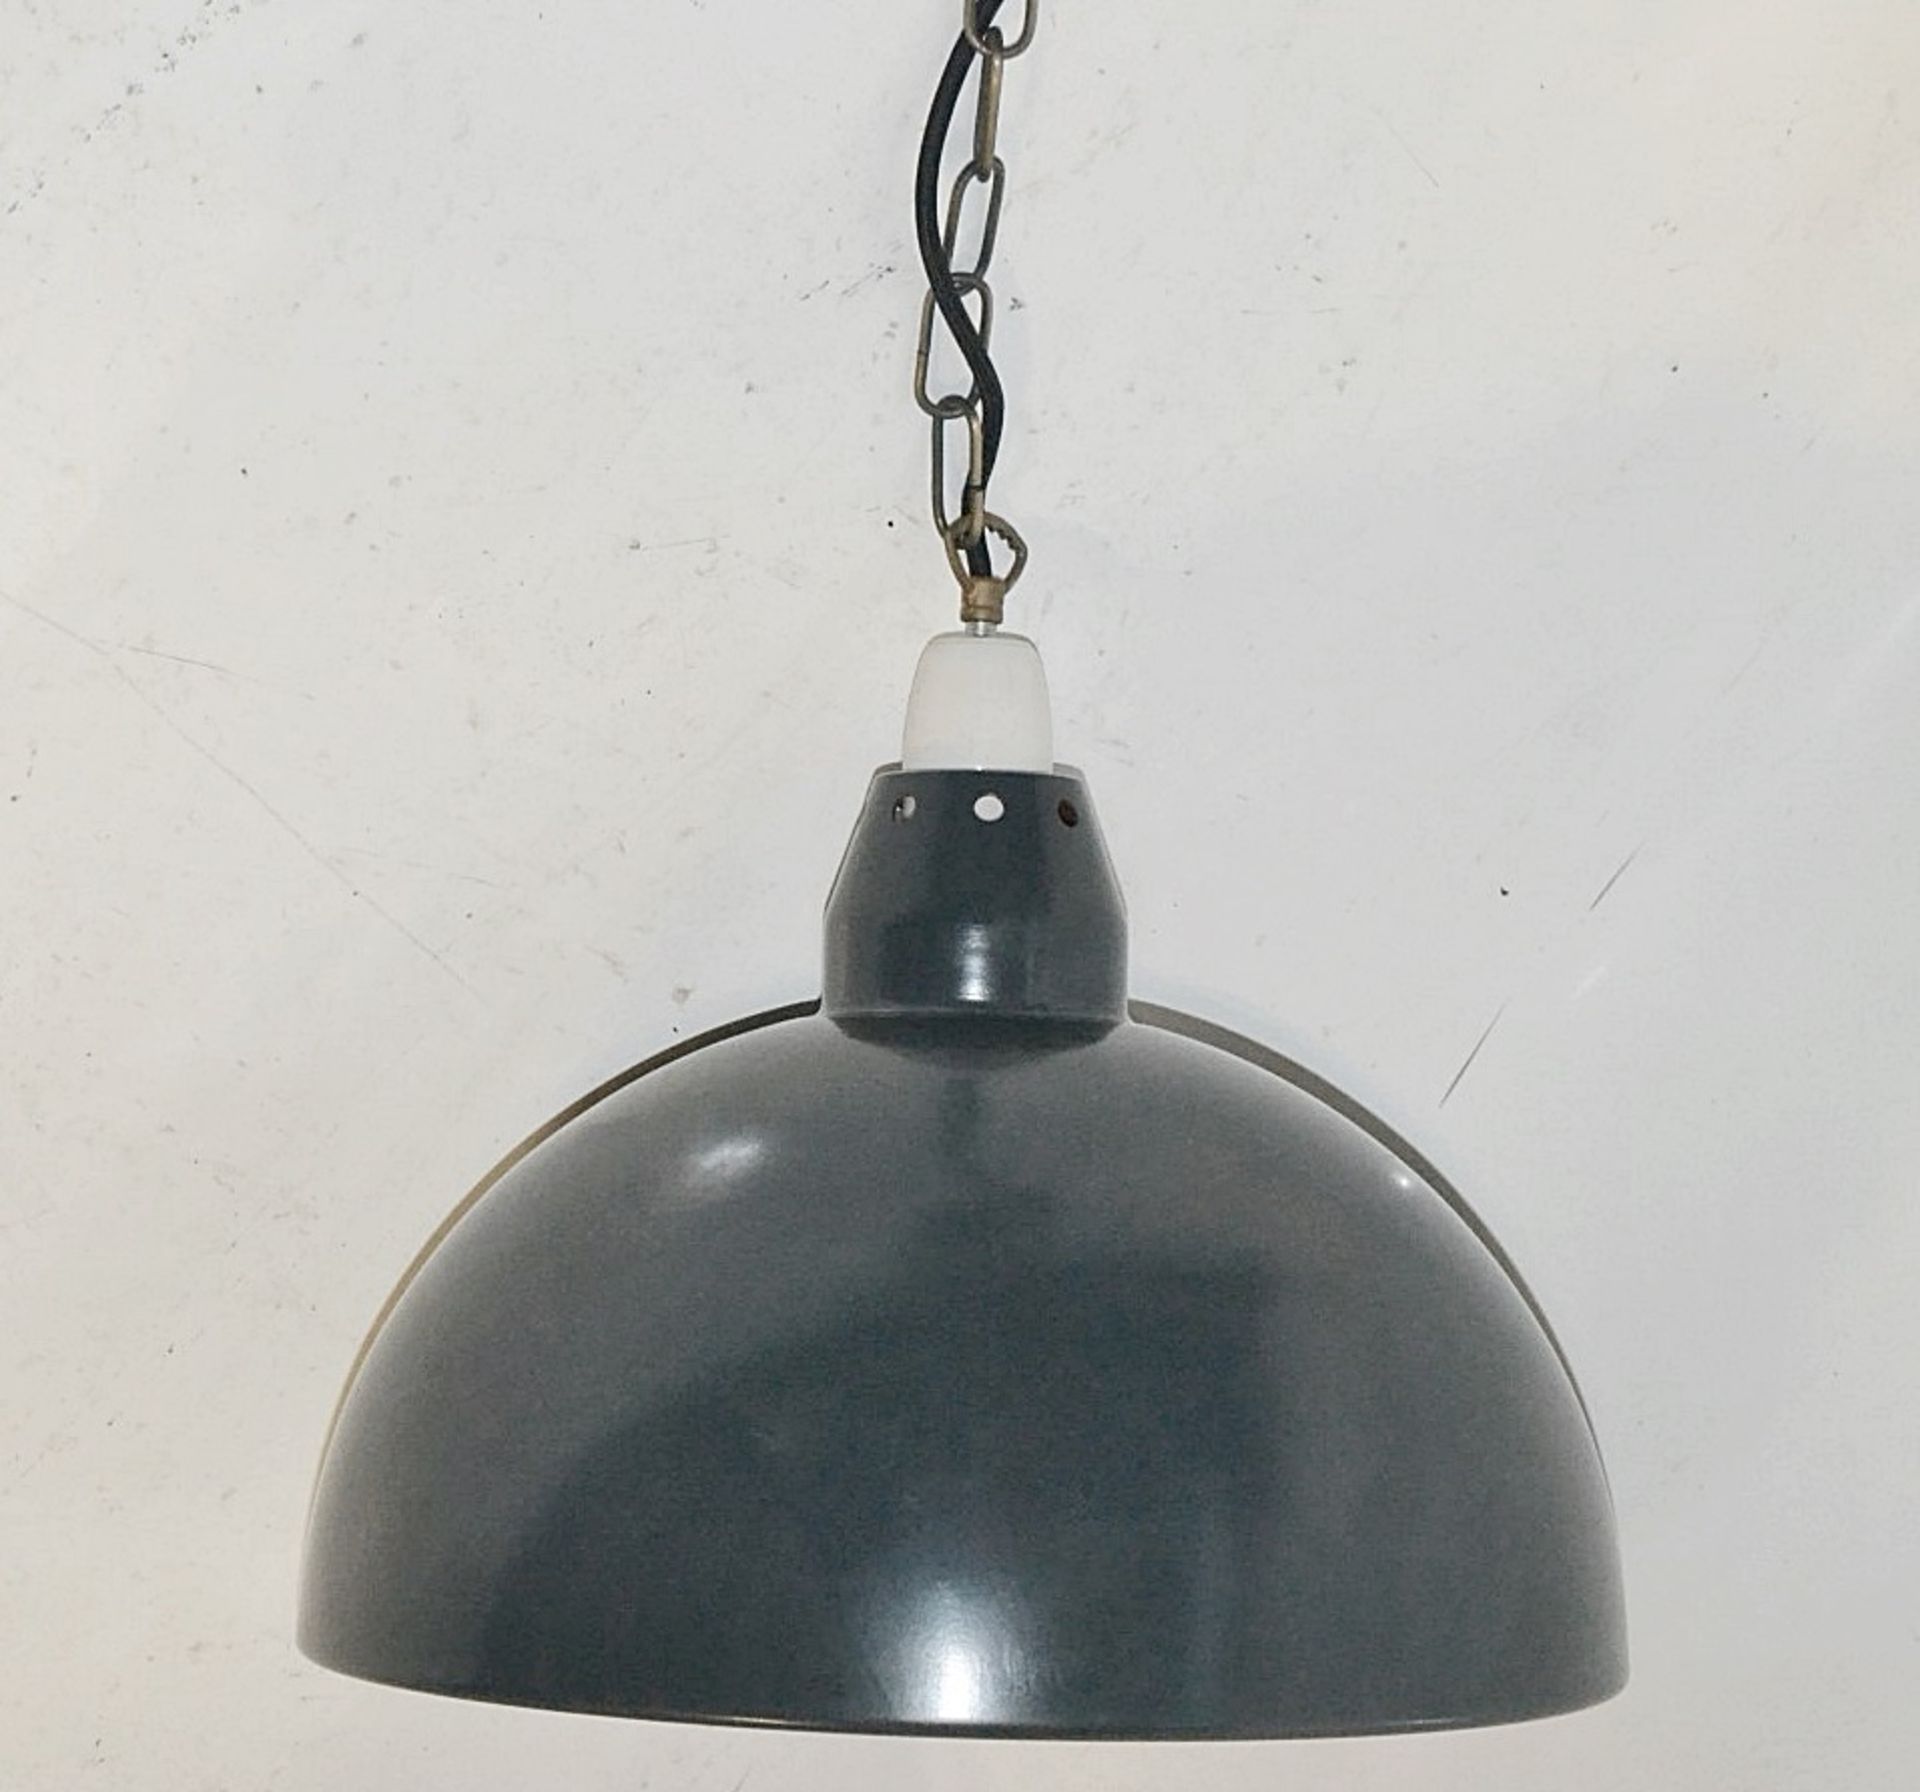 2 x Dome Pendant Ceiling Light Fittings With Chain And Black Fabric Flex - CL353 - Image 2 of 6